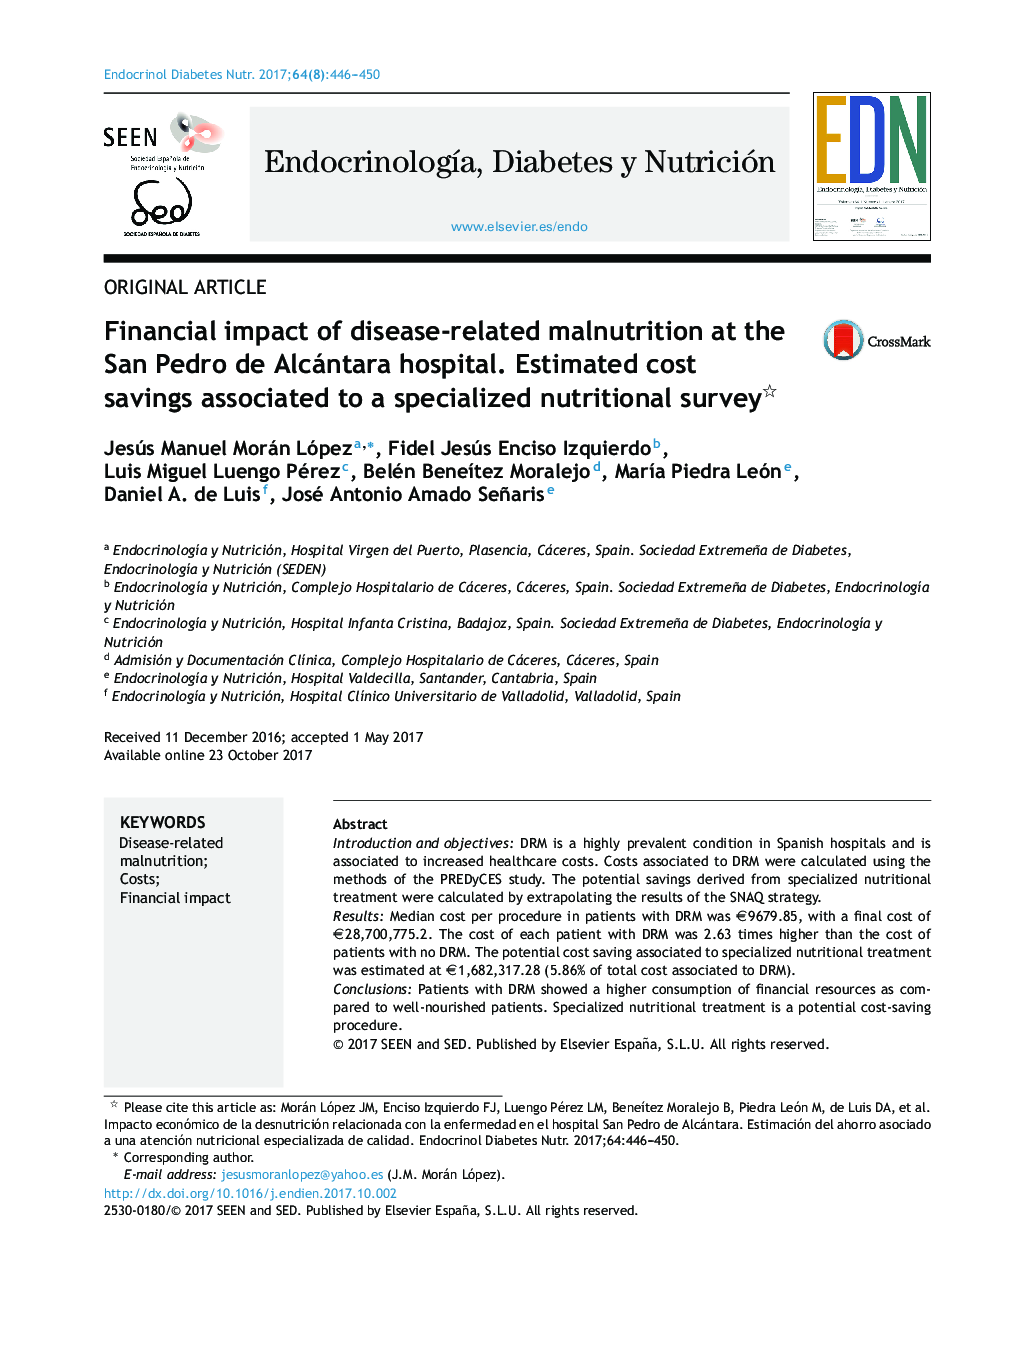 Financial impact of disease-related malnutrition at the San Pedro de Alcántara hospital. Estimated cost savings associated to a specialized nutritional survey